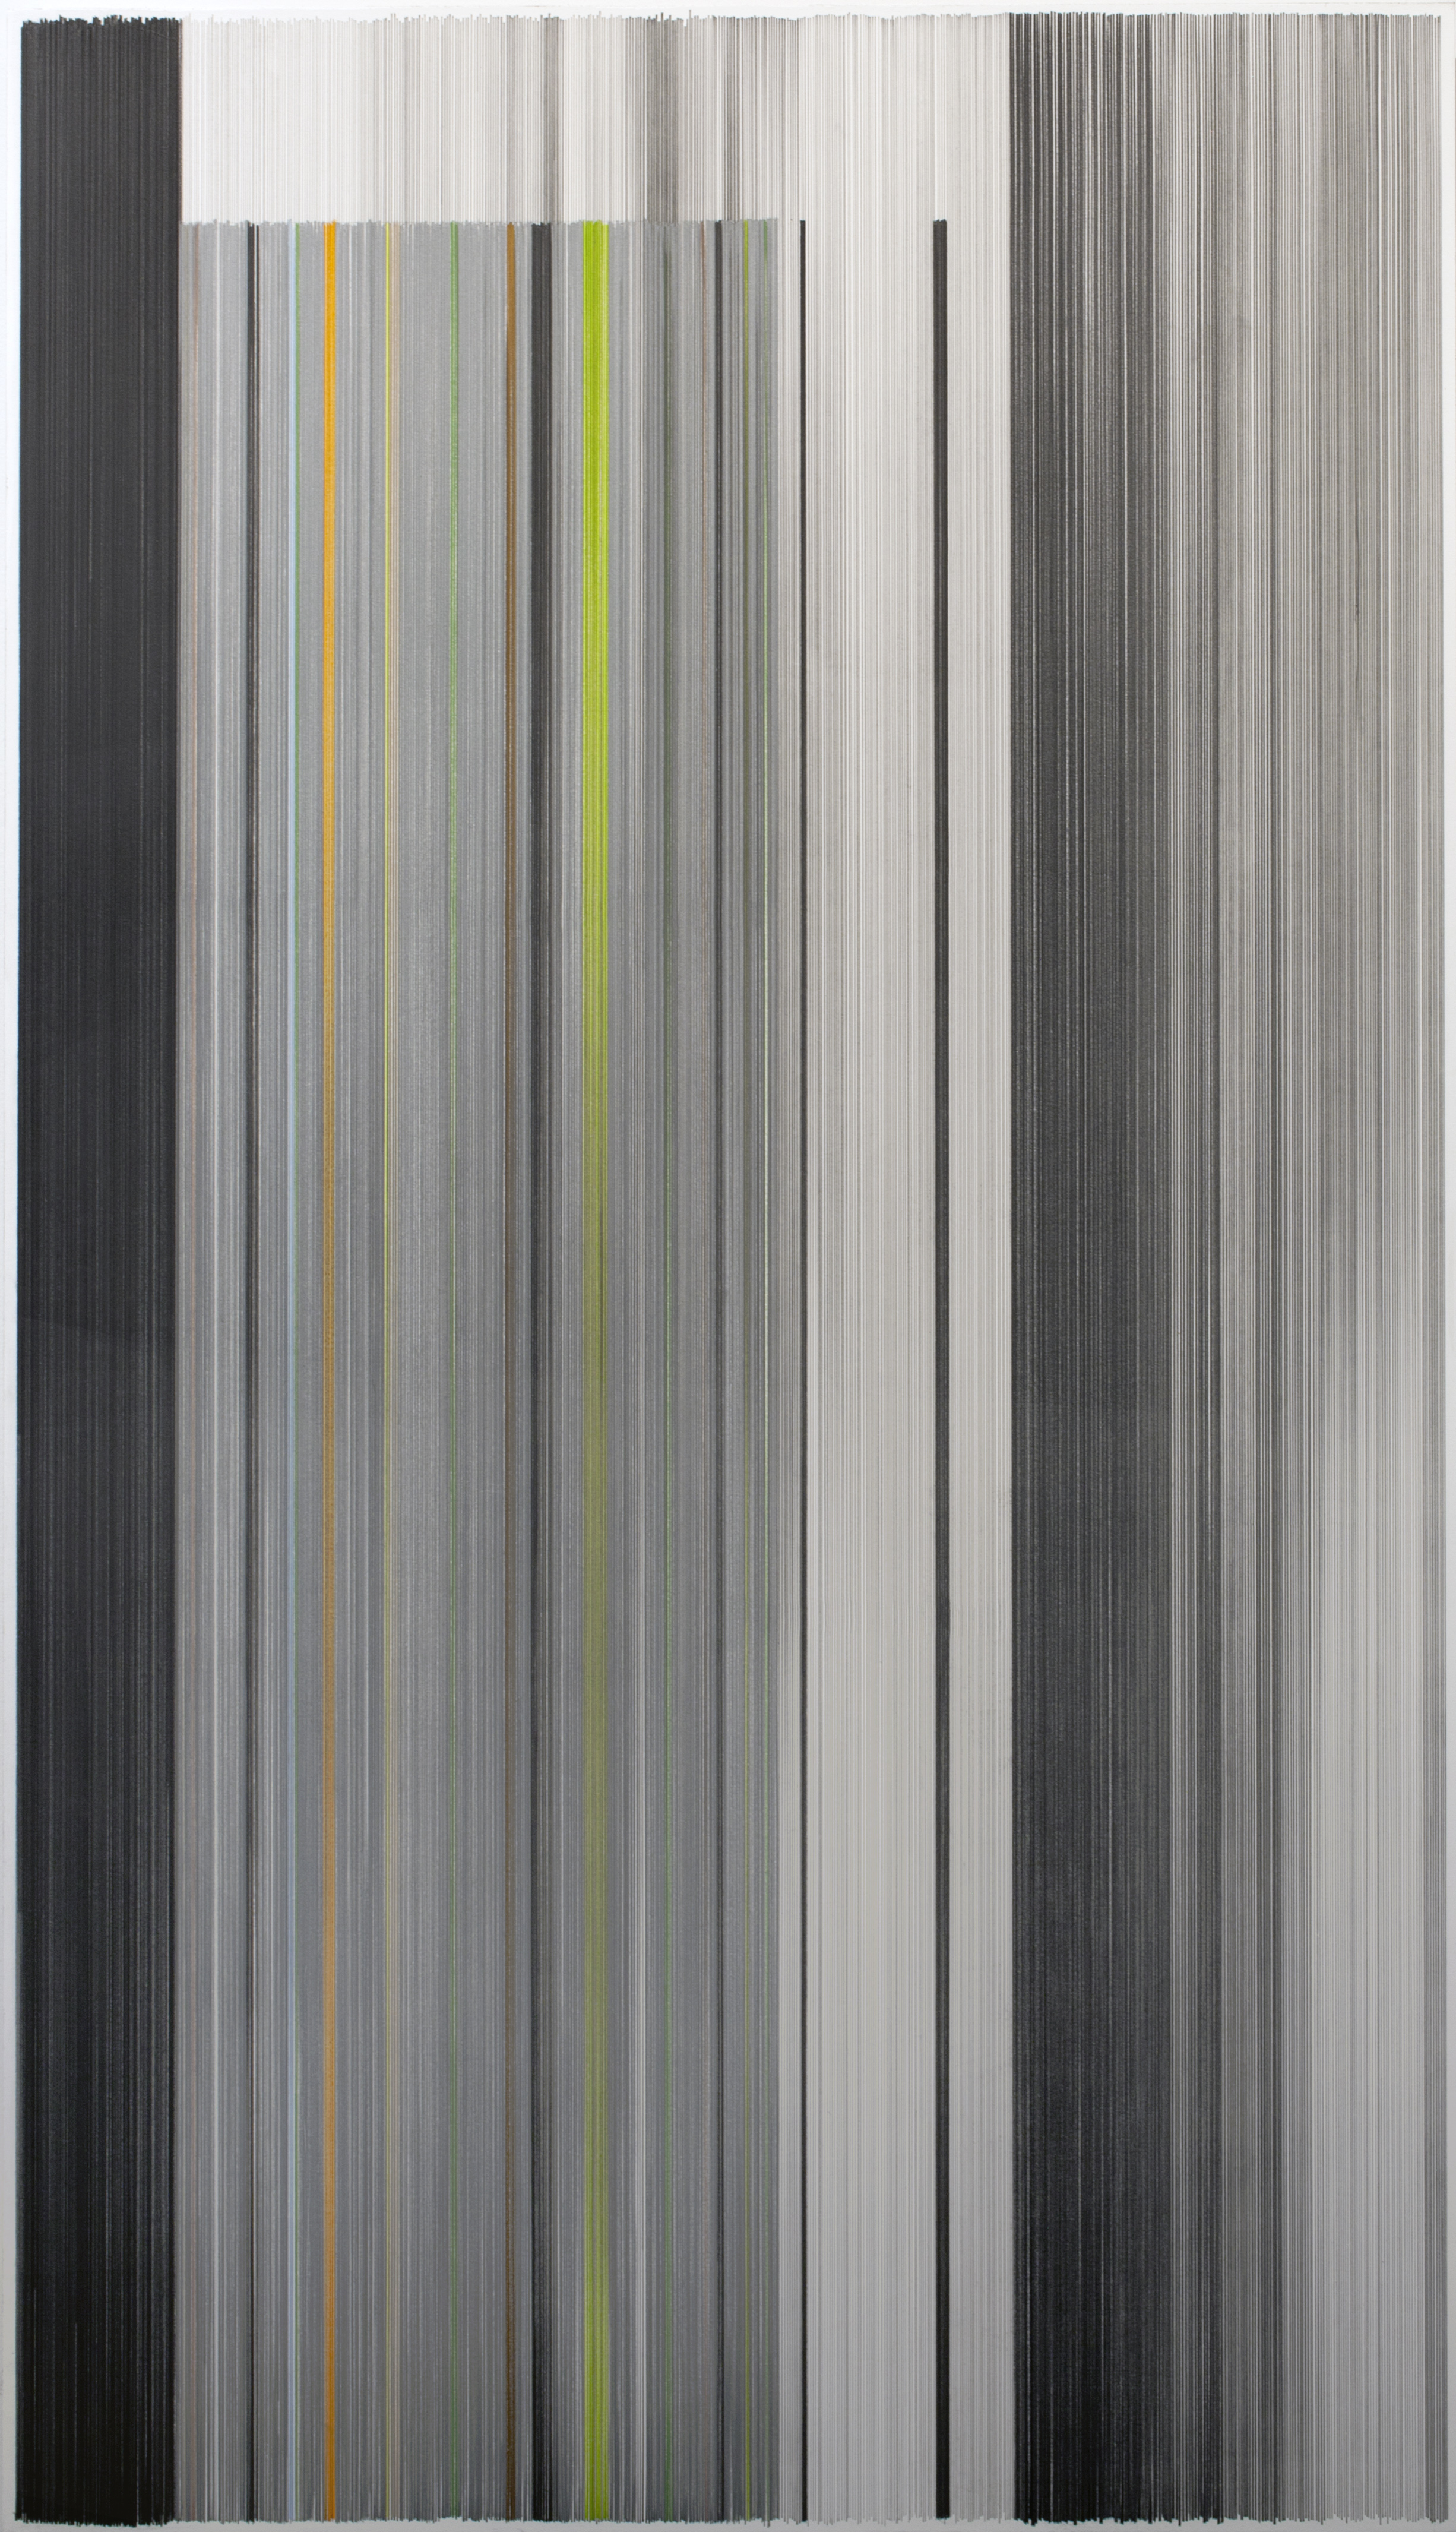    unfold 13   2016 graphite and colored pencil on mat board 59 x 34 inches 